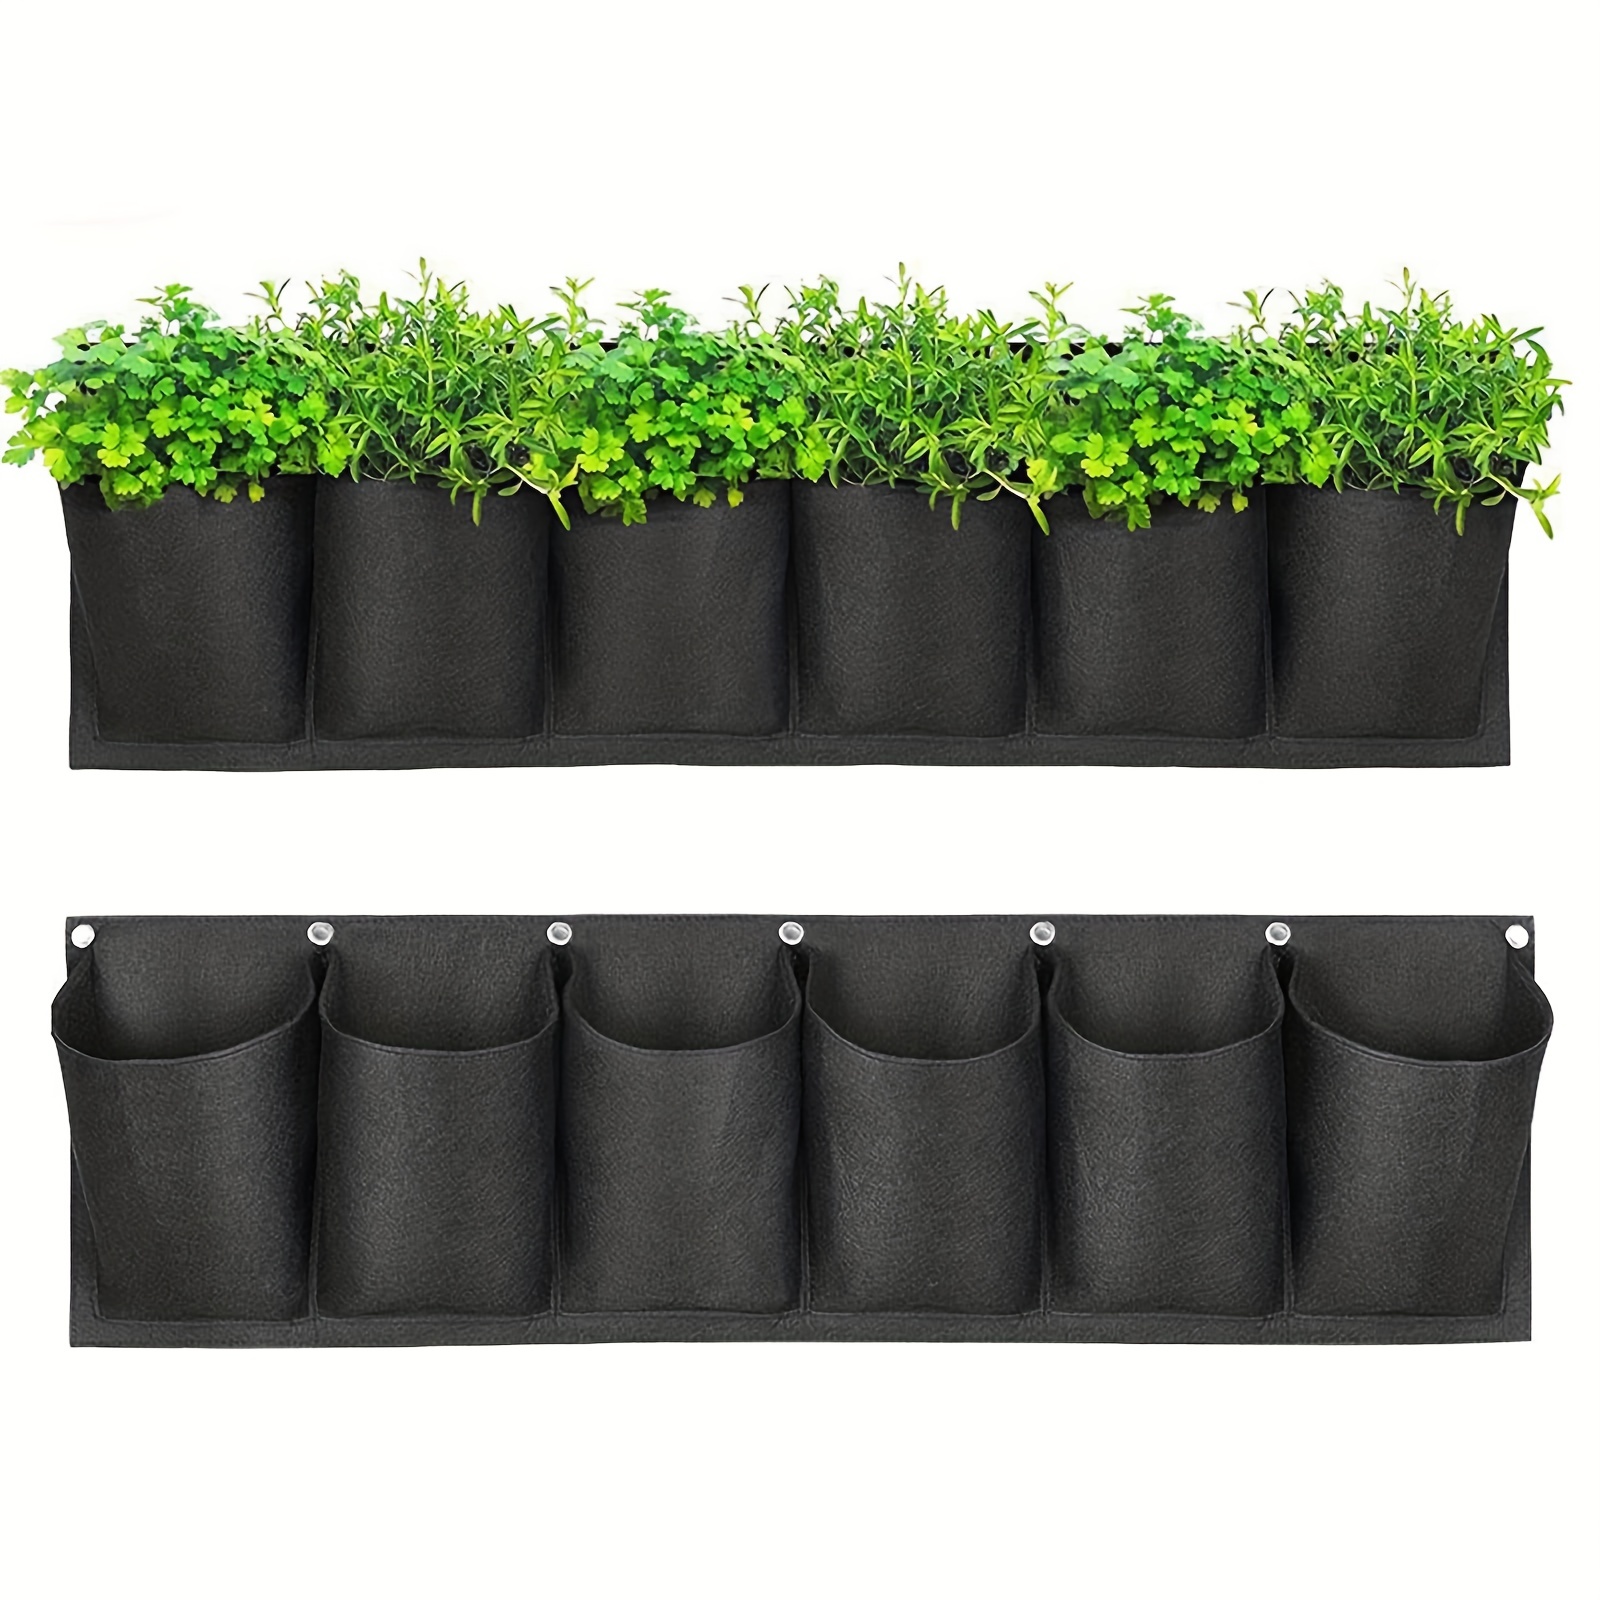 

1 Pack, Hanging Planting Grow Bags 6 Pockets Vertical Wall Mounted Planter Bag Indoor Outdoor Storage Container Black Bag For Fence Garden Flower Herb